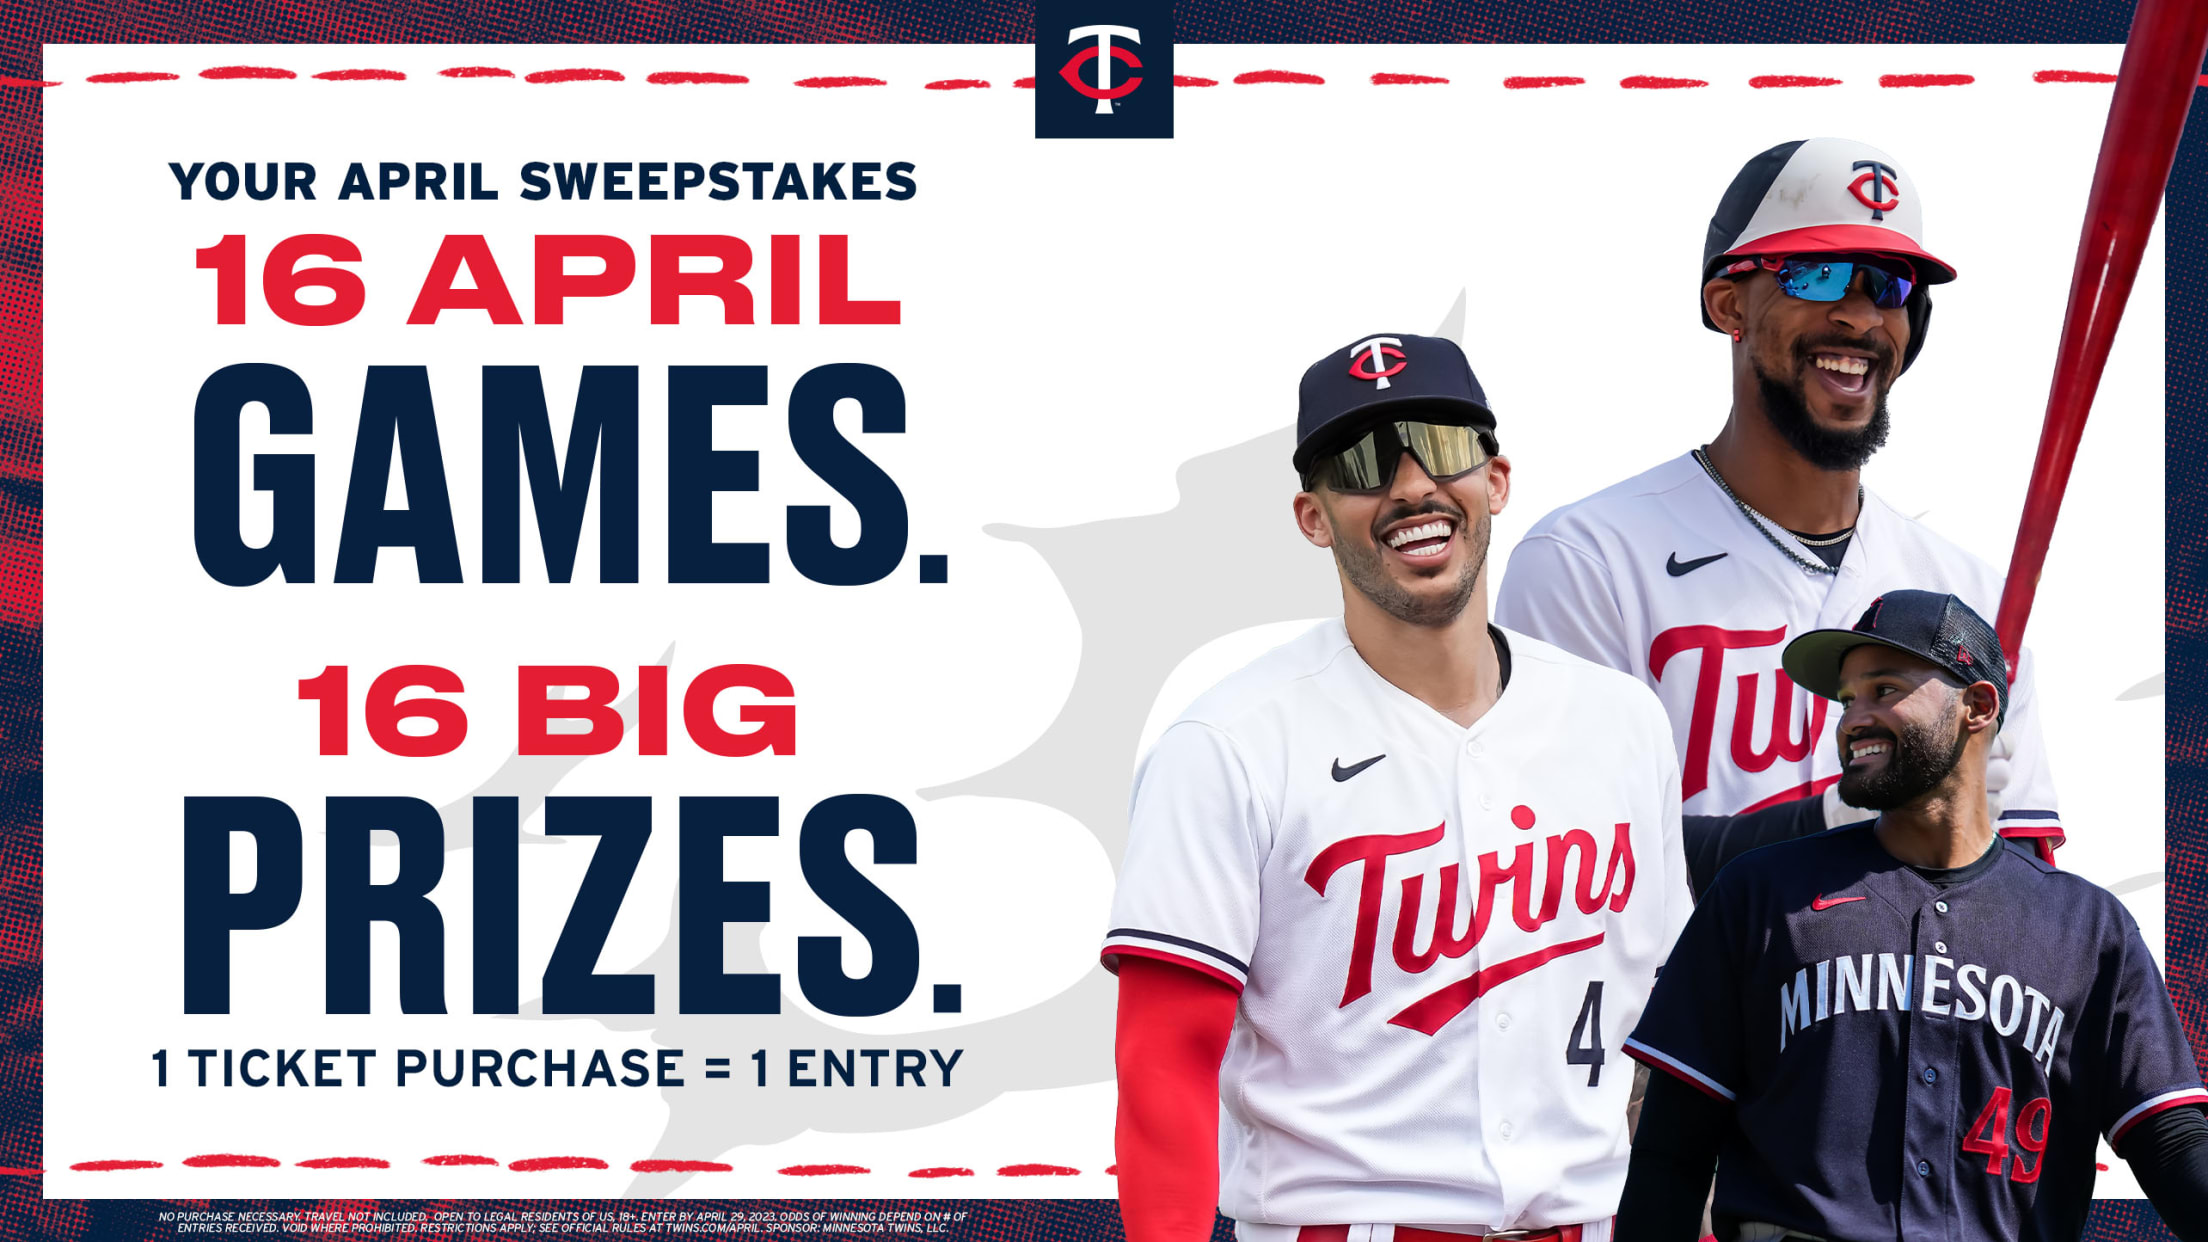 Your April Sweepstakes